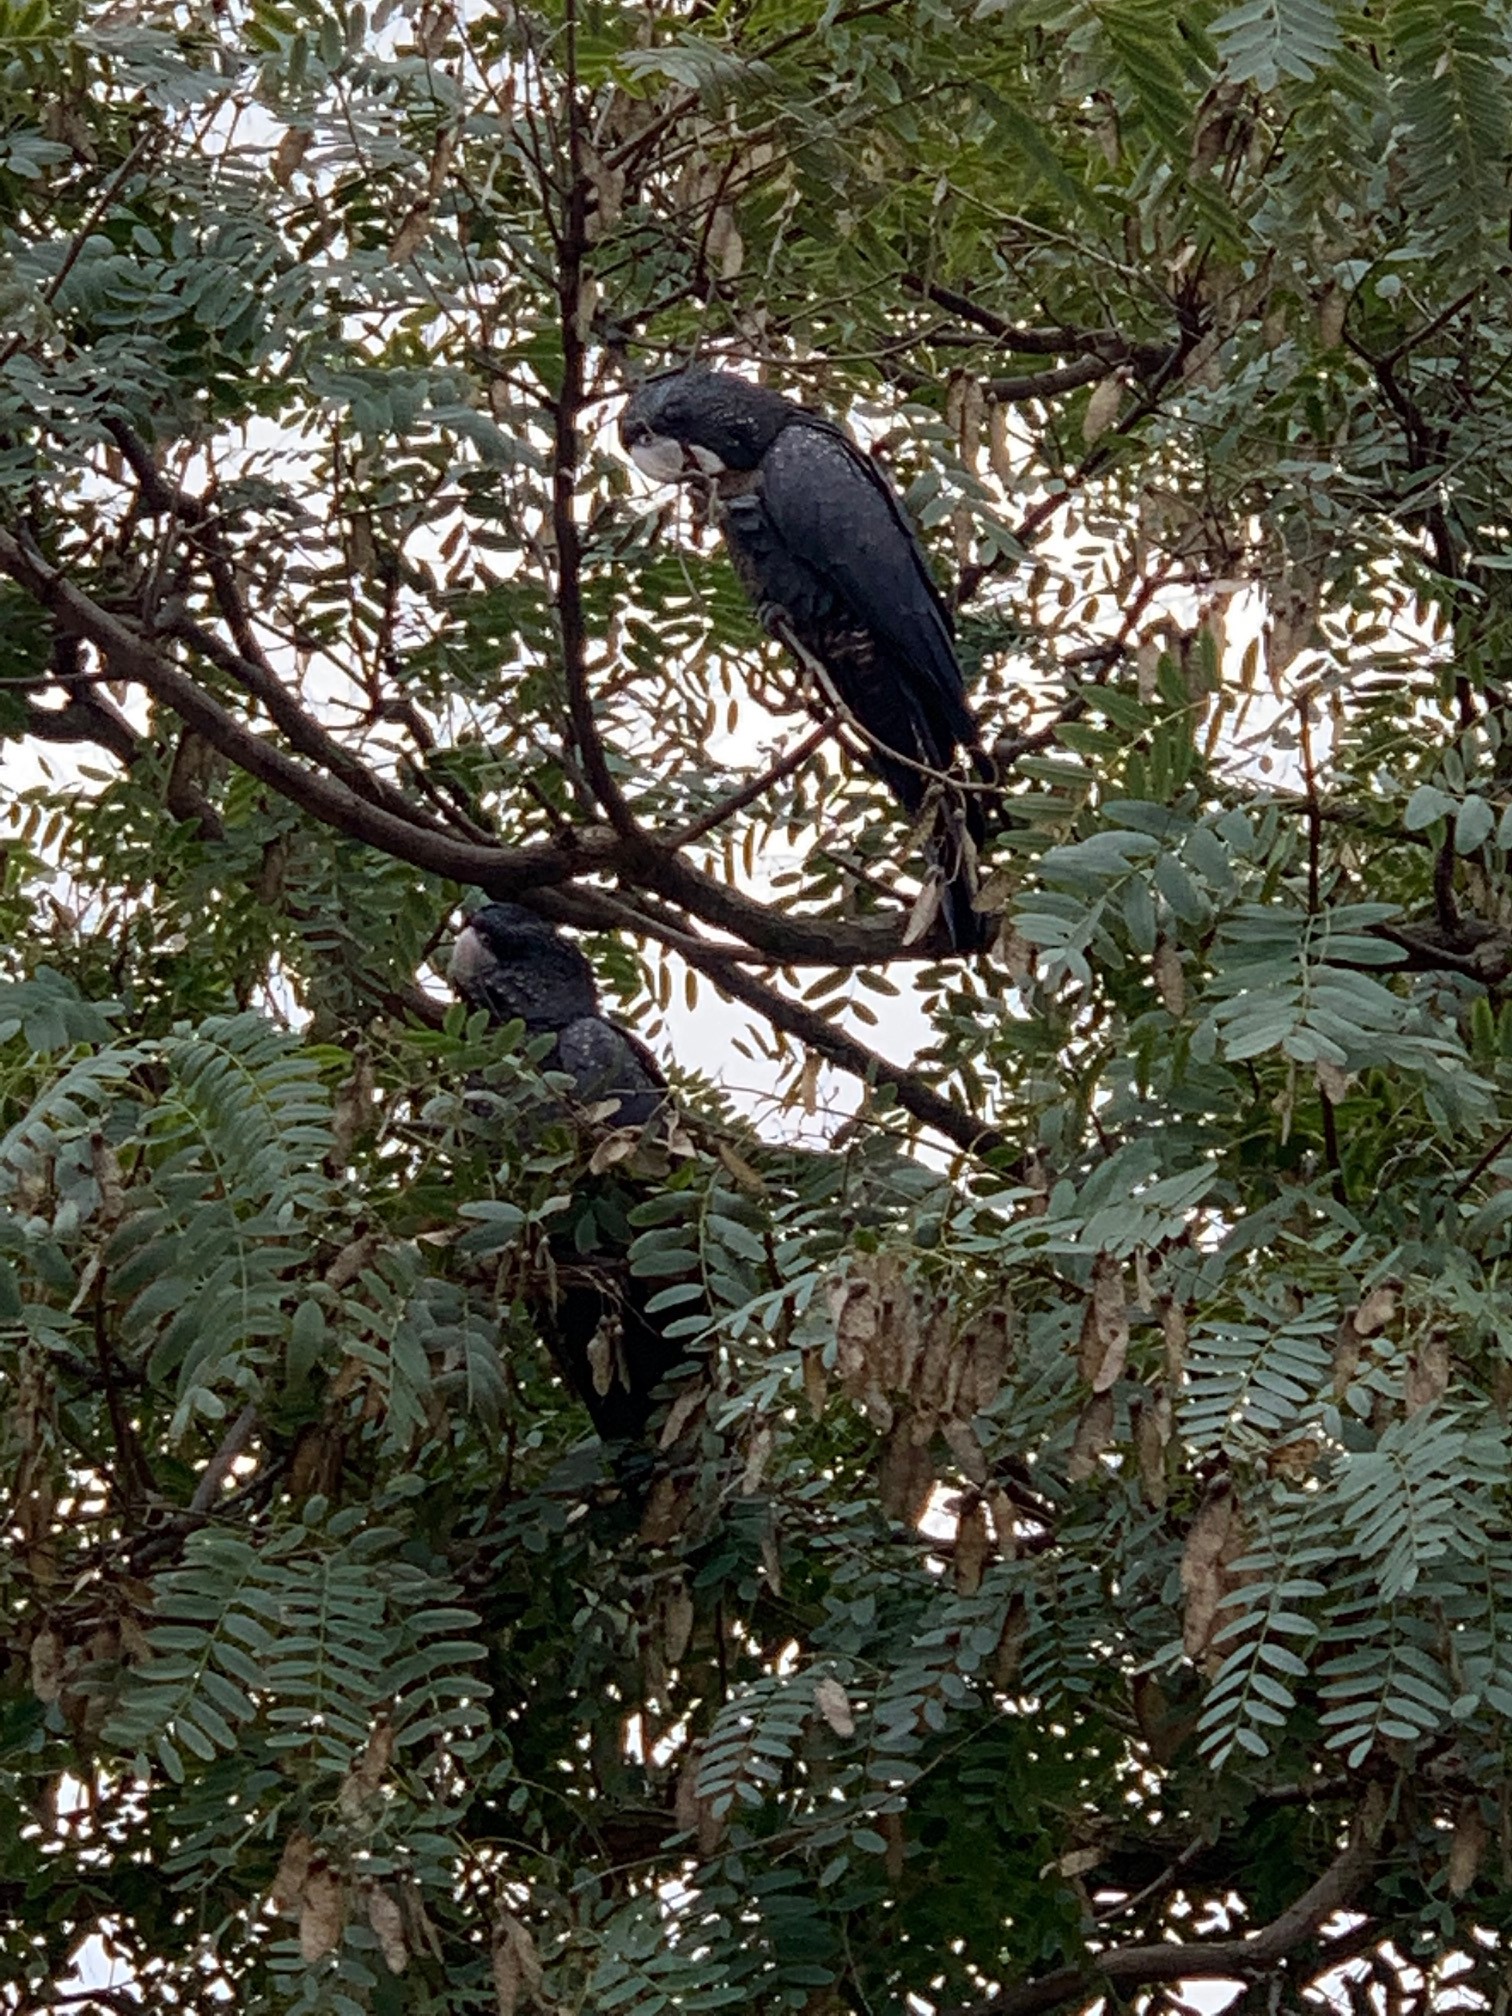 black cockatoos can be found in the trees at Karrakatta Cemetery for most of the year.